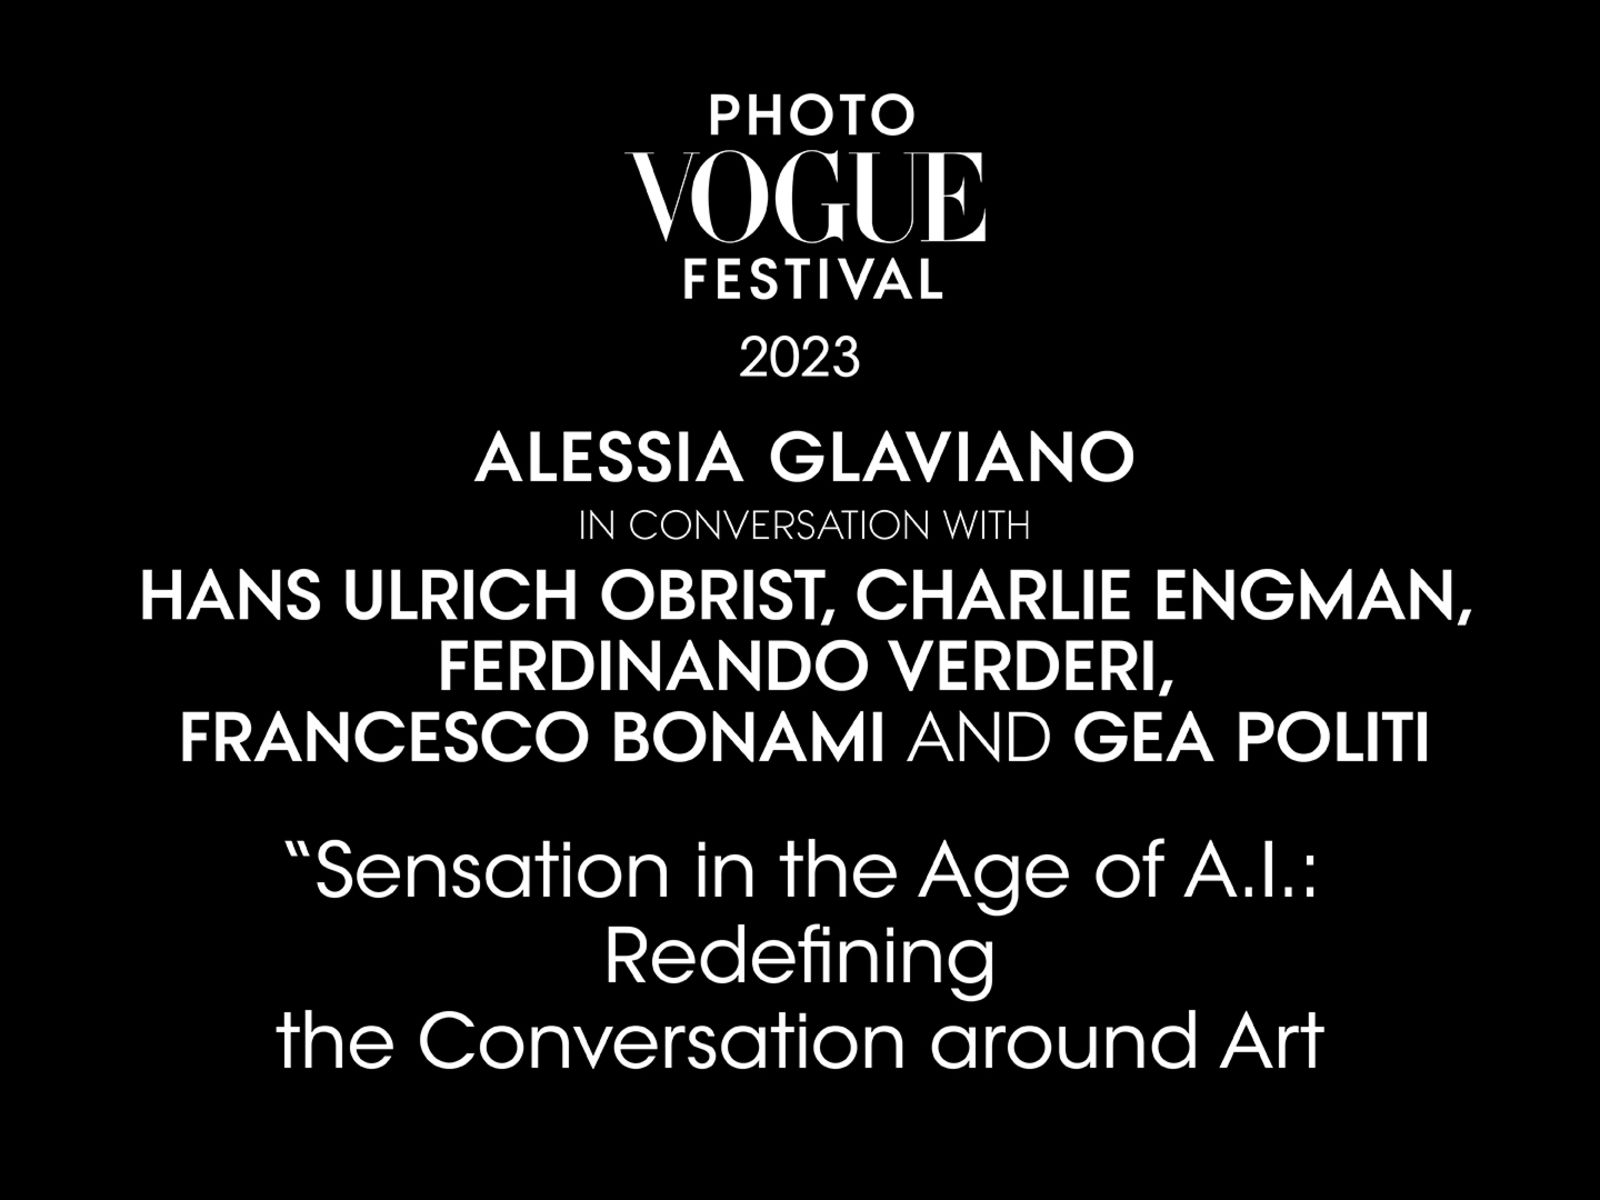 “Sensation in the Age of A.I.: Redefining the Conversation around Art” | PhotoVogue Festival 2023: What Makes Us Human? Image in the Age of A.I.